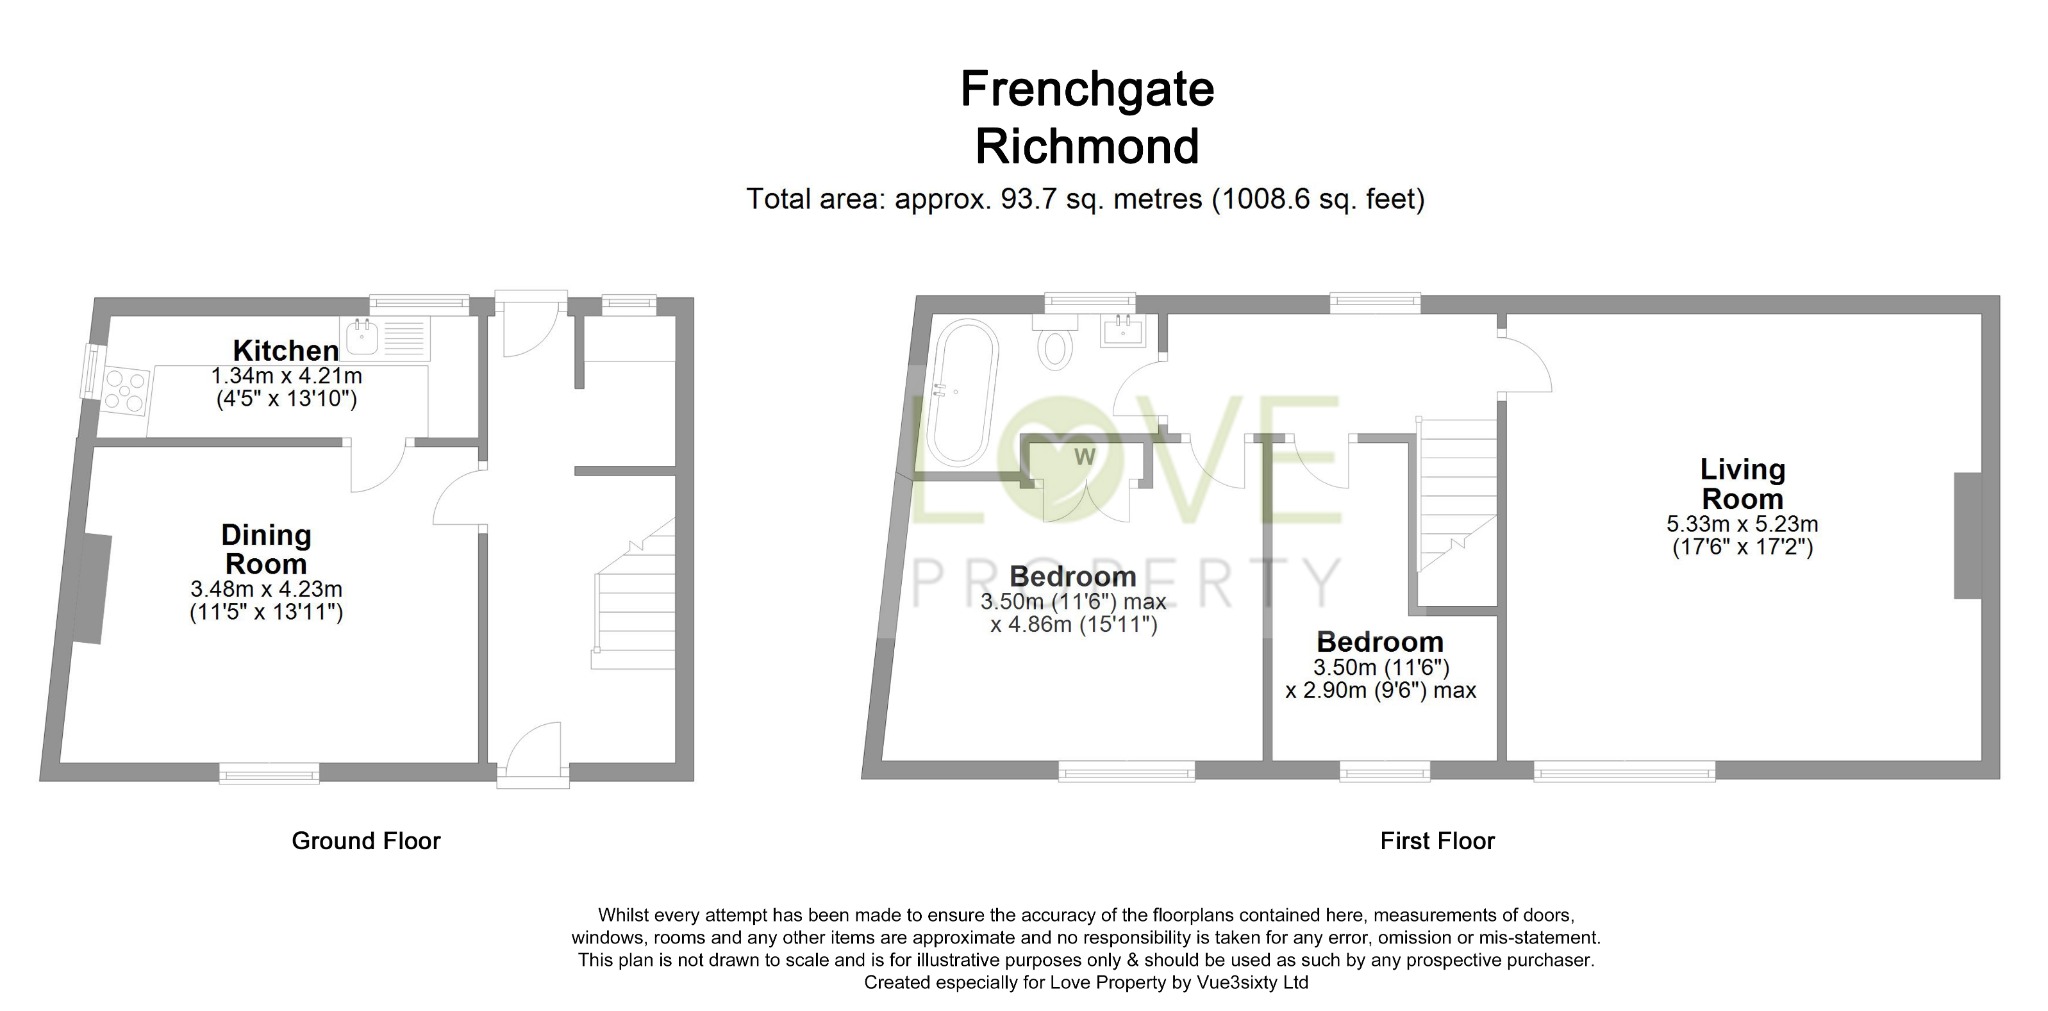 2 bed semi-detached house to rent in Frenchgate, Richmond - Property floorplan